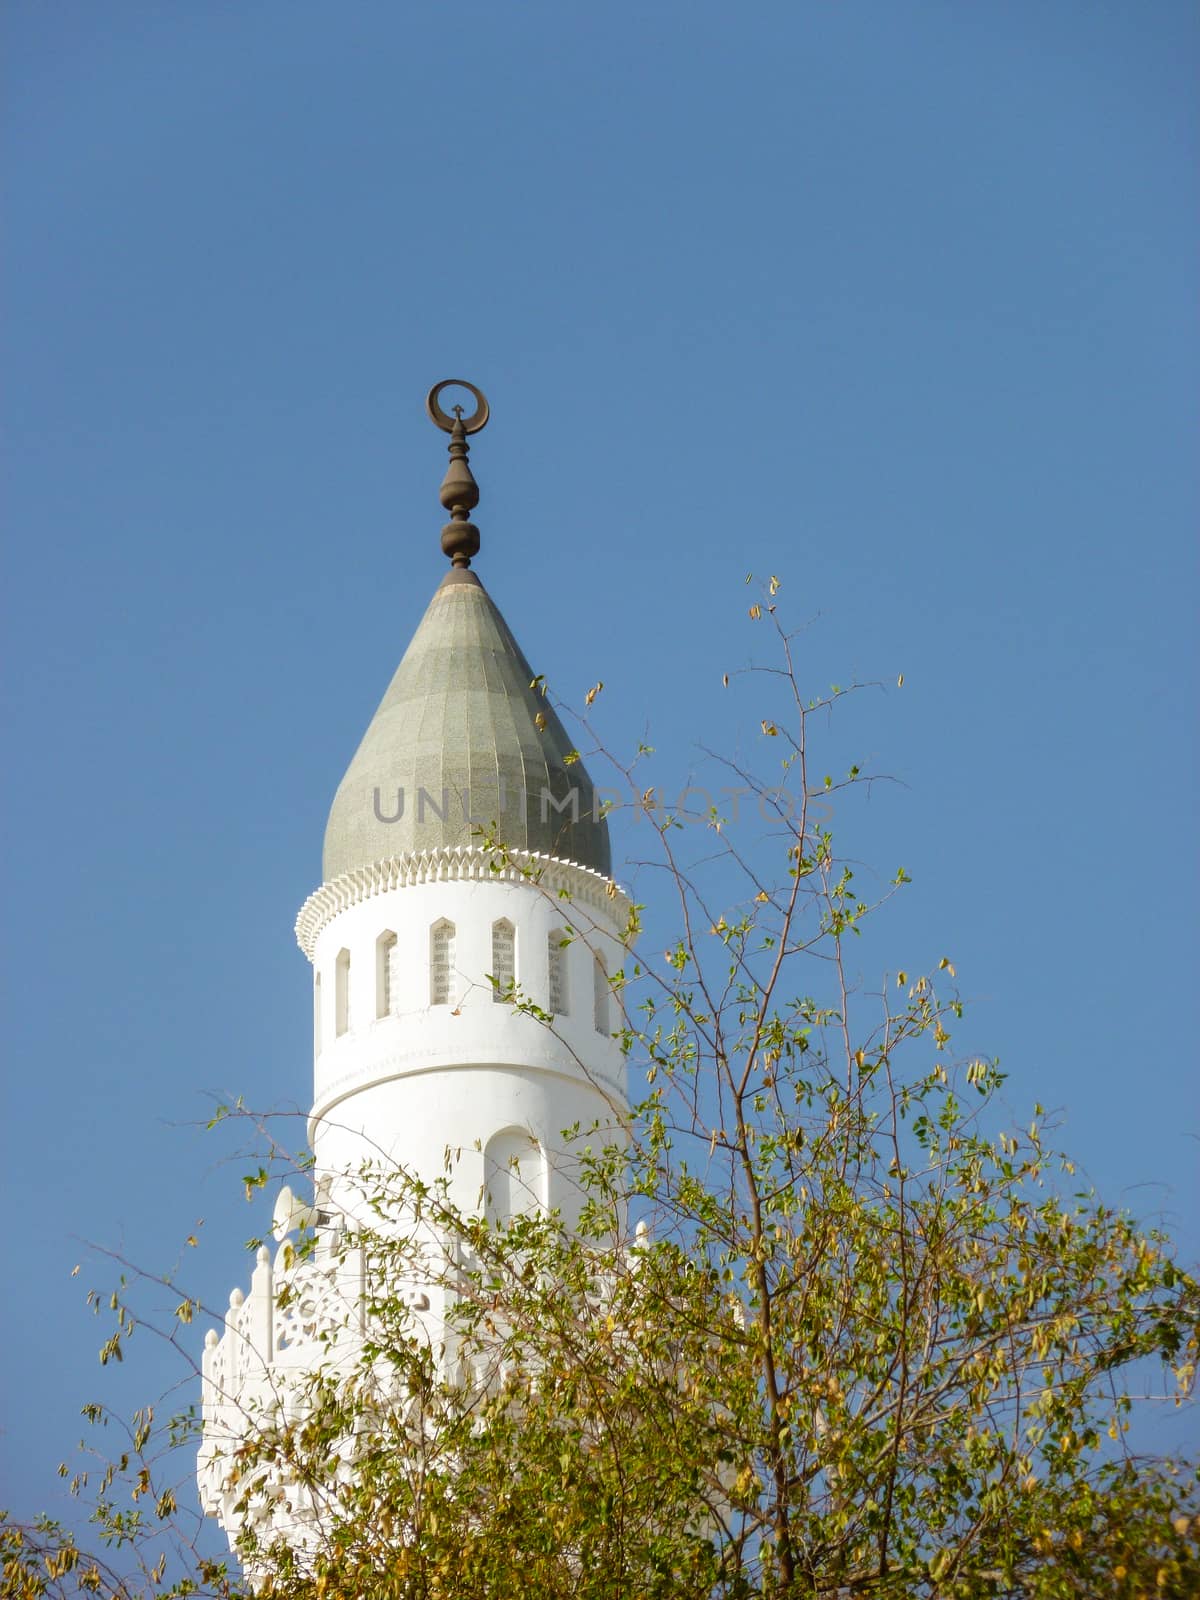 Minaret of Quba mosque with blue sky background